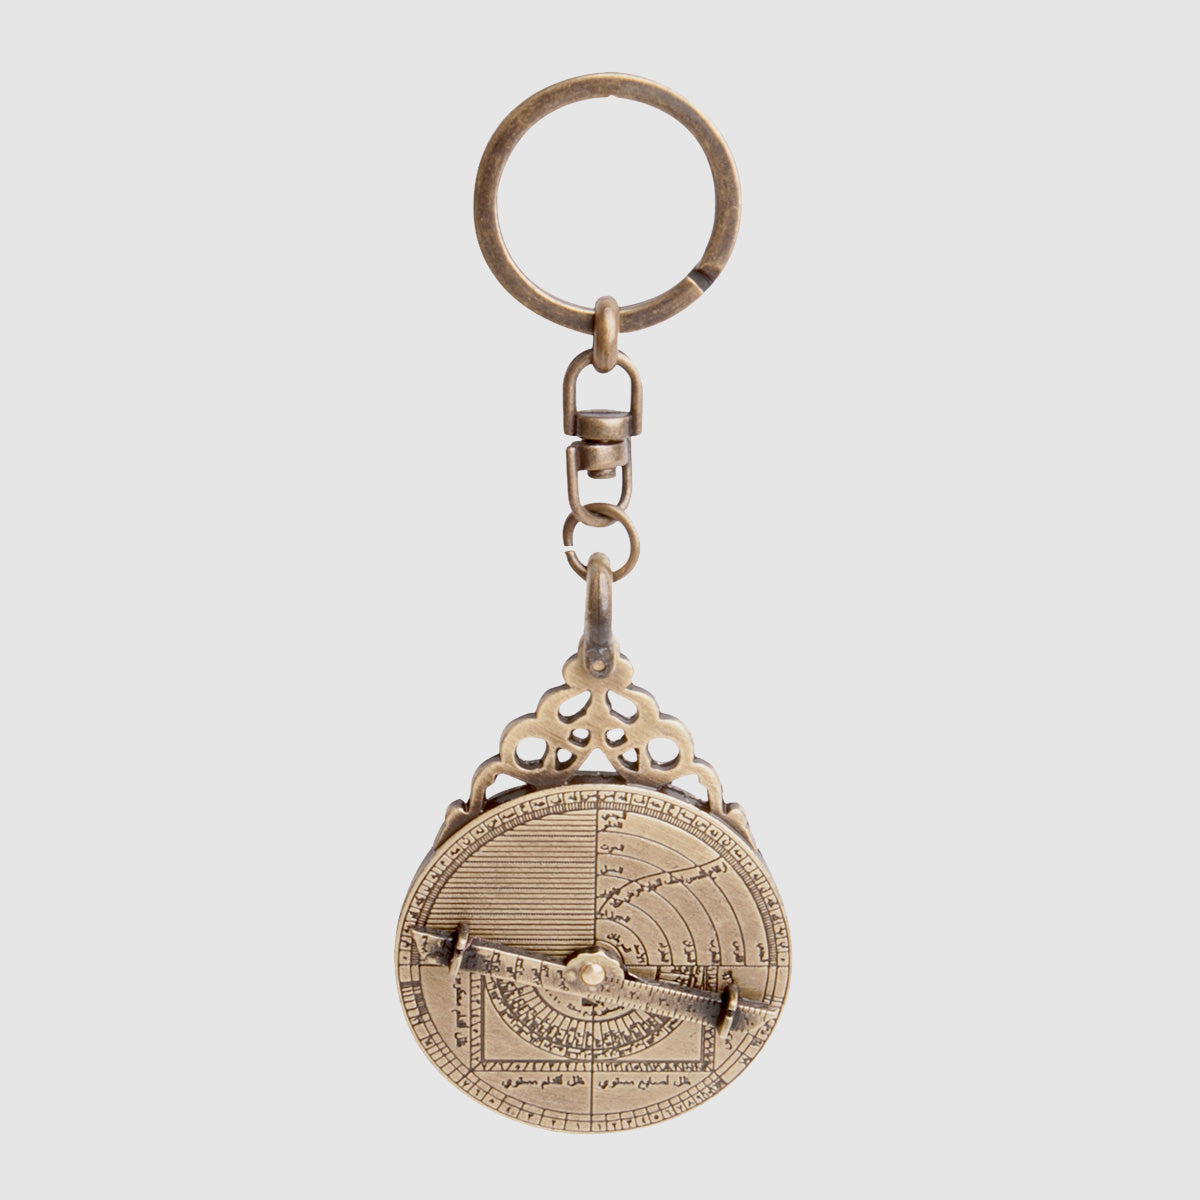 llavero louis vuitton - Buy Antique keyrings and keychains on